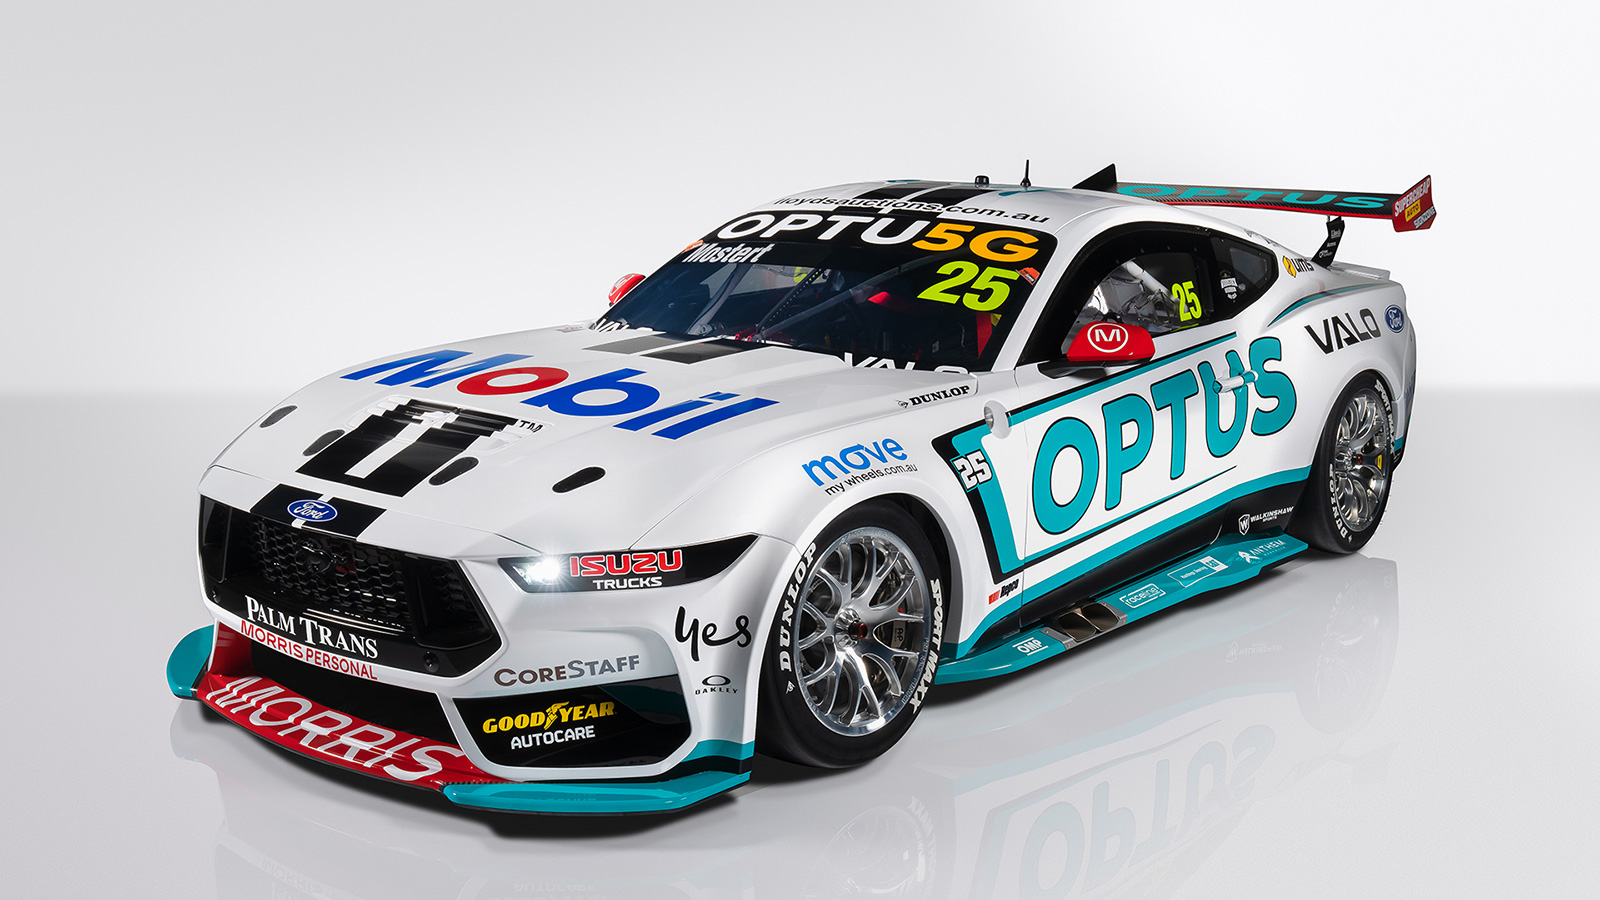 The all-new Mobil 1™ Optus Racing No. 25 Ford Mustang GT.